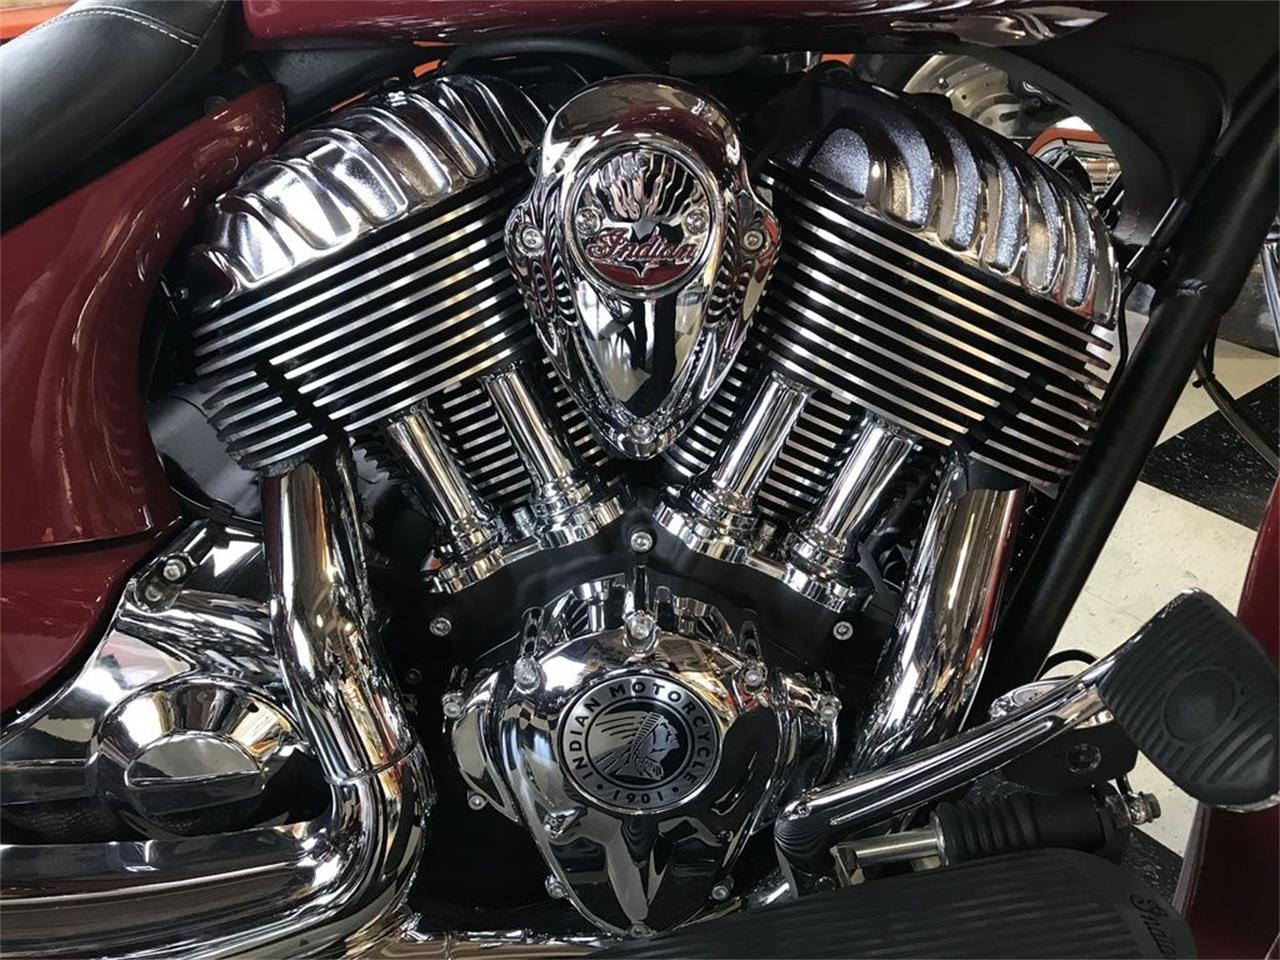 2014 Indian Chieftain for sale in Henderson, NV – photo 7